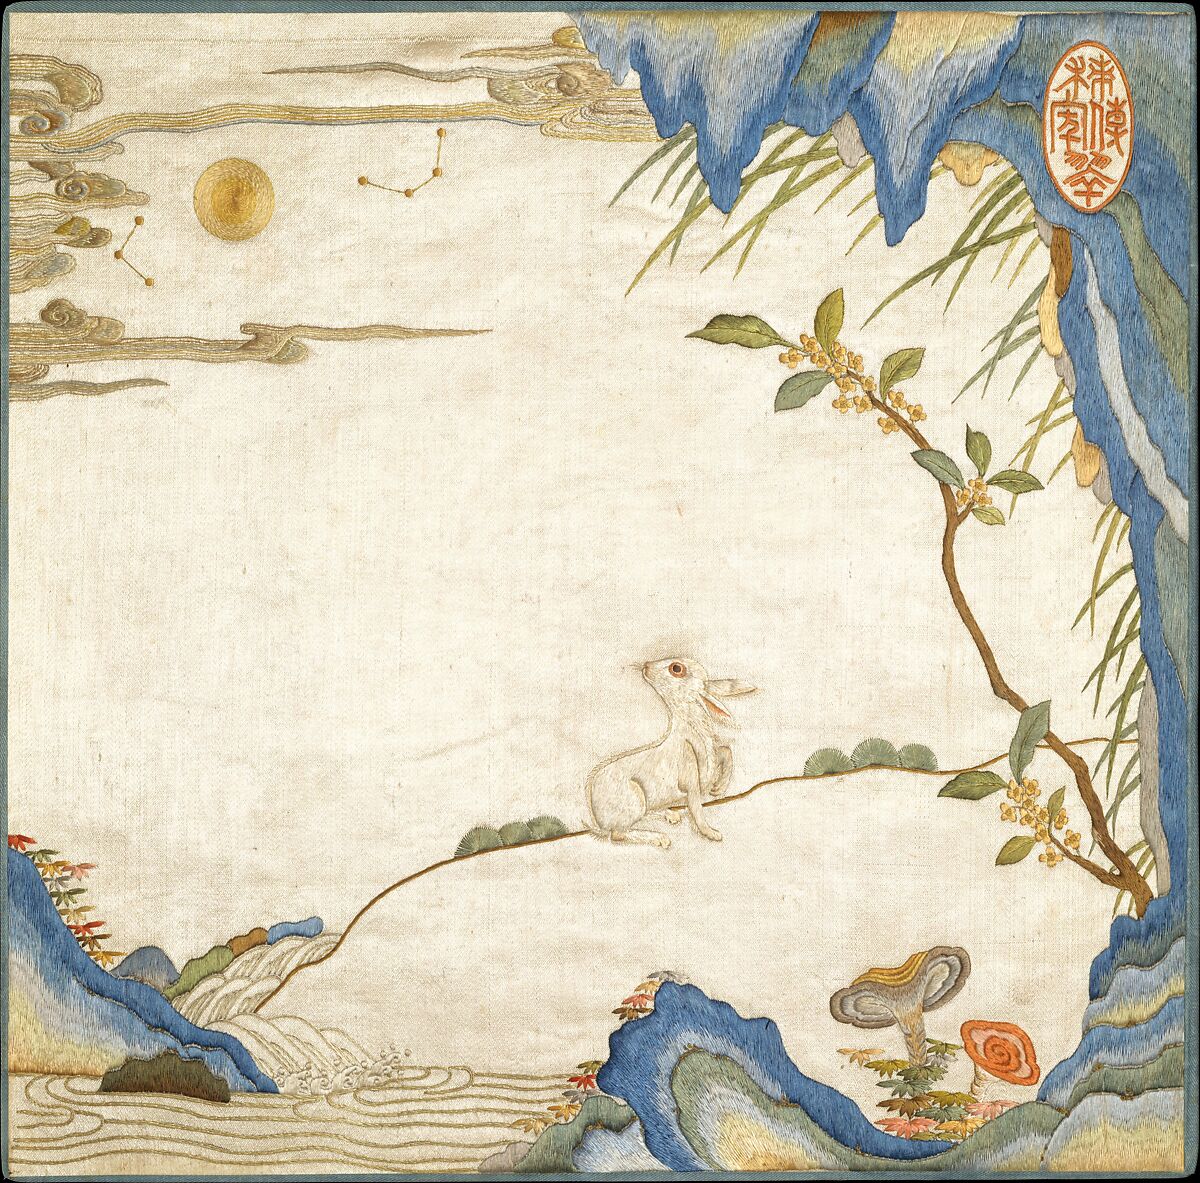 Rabbit gazing at the moon and stars besides a blossoming osmanthus, lingzhi fungus, and autumn leaves, Silk embroidery on silk satin, China 